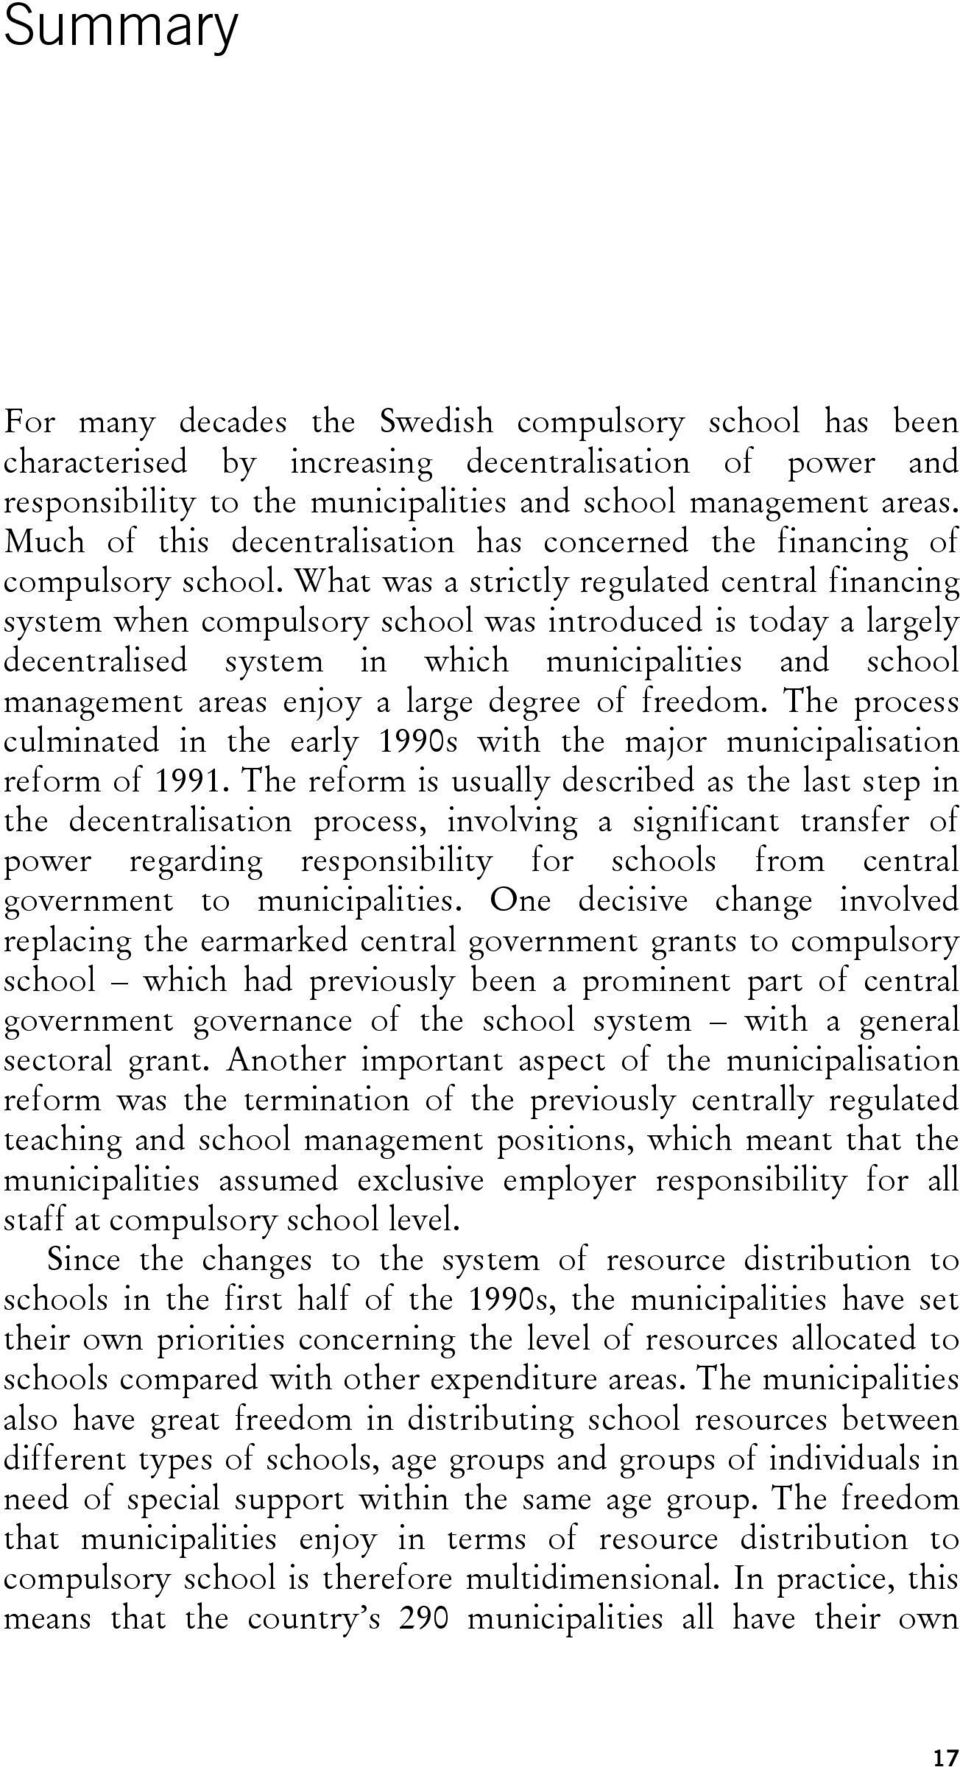 What was a strictly regulated central financing system when compulsory school was introduced is today a largely decentralised system in which municipalities and school management areas enjoy a large